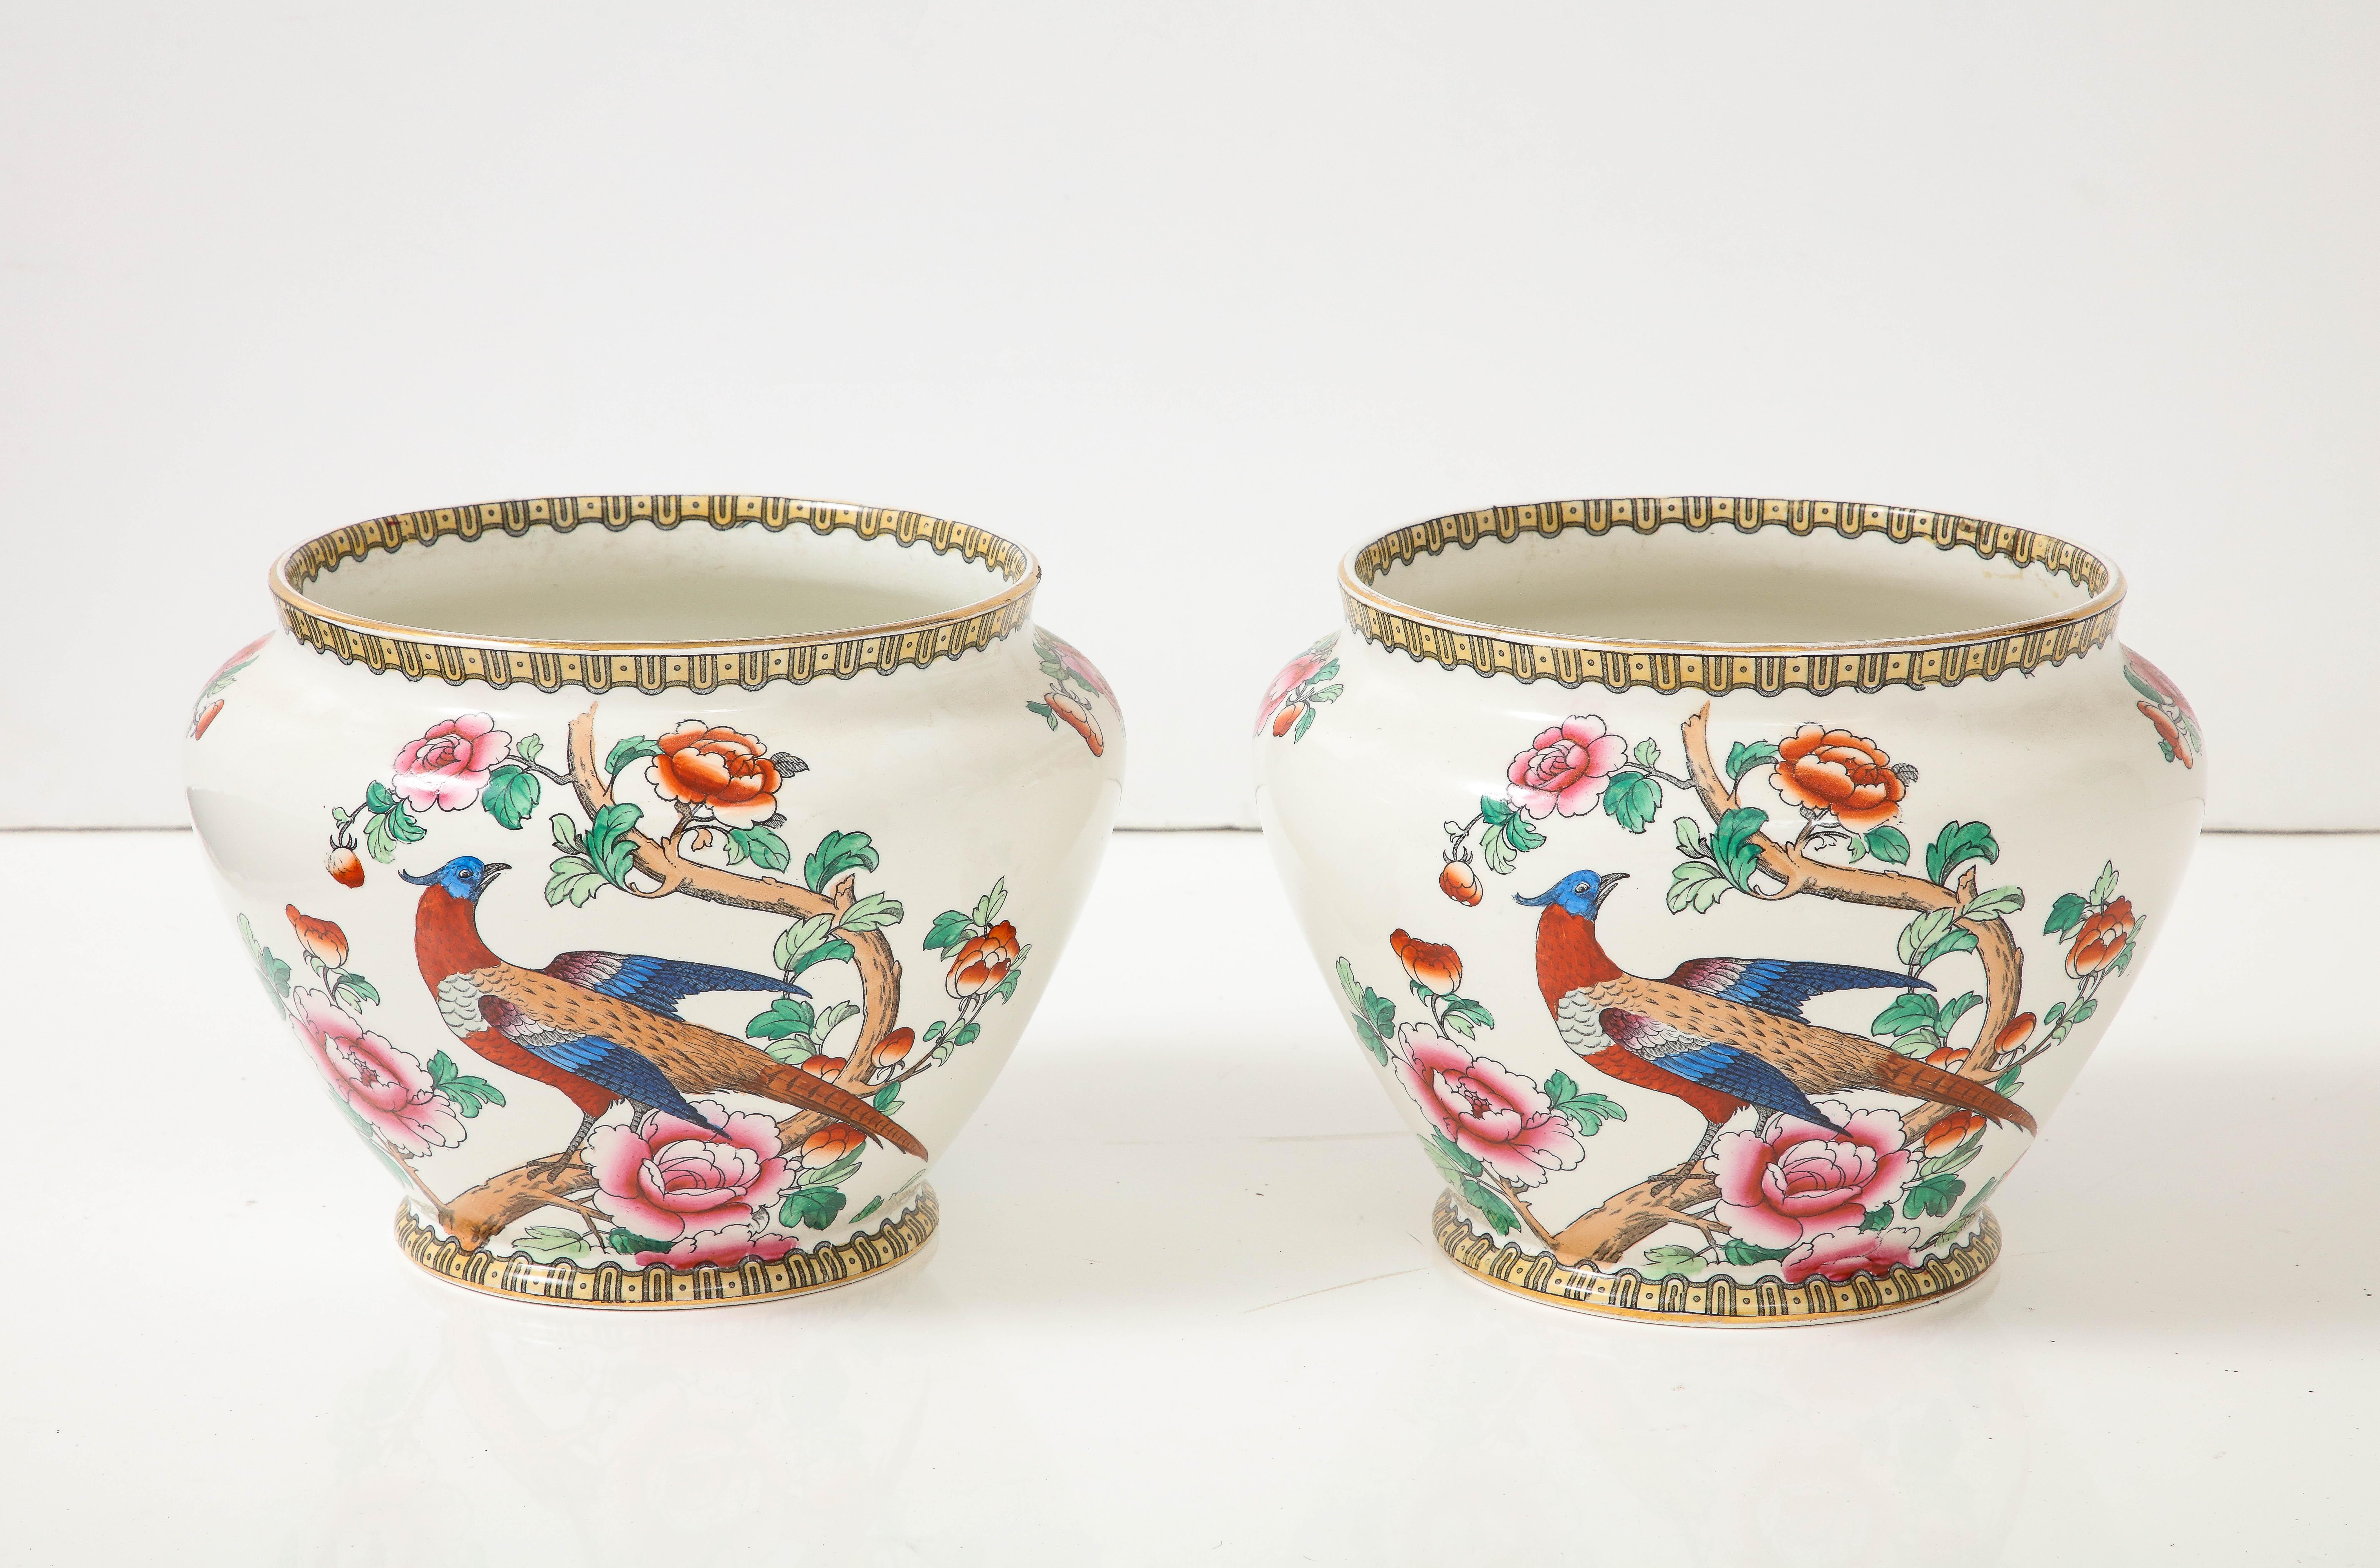 Pair of hand decorated earthenware cache pots depicting colorful pheasants and exhuberant florals. Cream earthenware background contrasted with vibrant colors. Each marked on bottom, F. Winkle and Company, England.